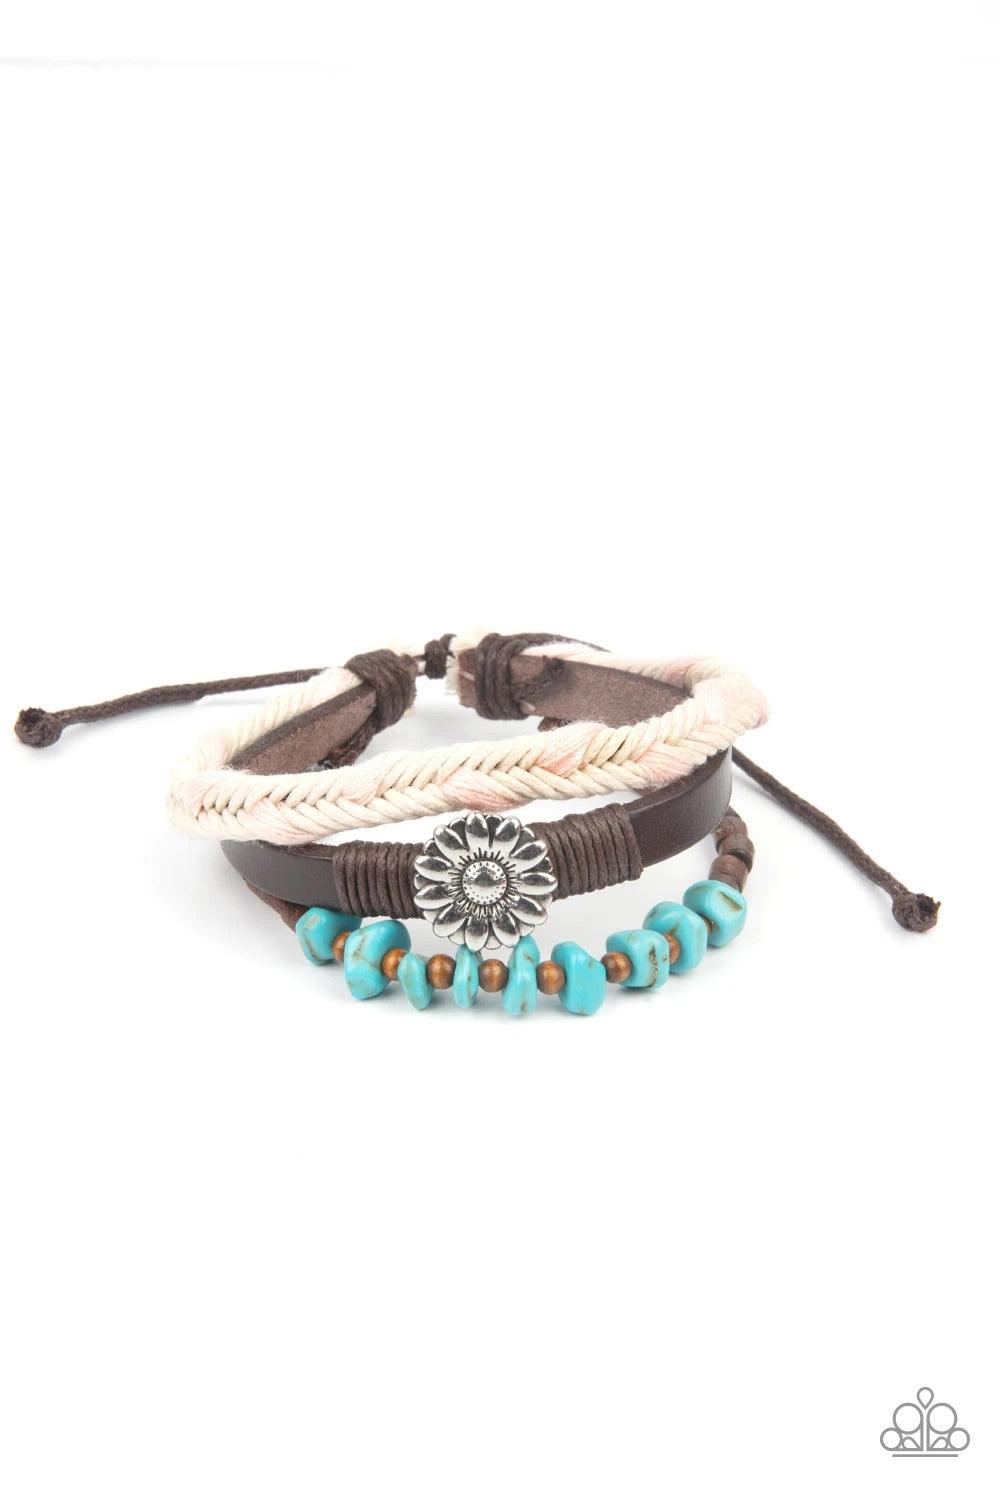 Paparazzi Accessories Terrain Trend - Pink Featuring a silver floral centerpiece, mismatched strands of turquoise stones and wooden beads, brown leather, and braided pink and white cording layers across the wrist for a seasonal flair. Features an adjustab